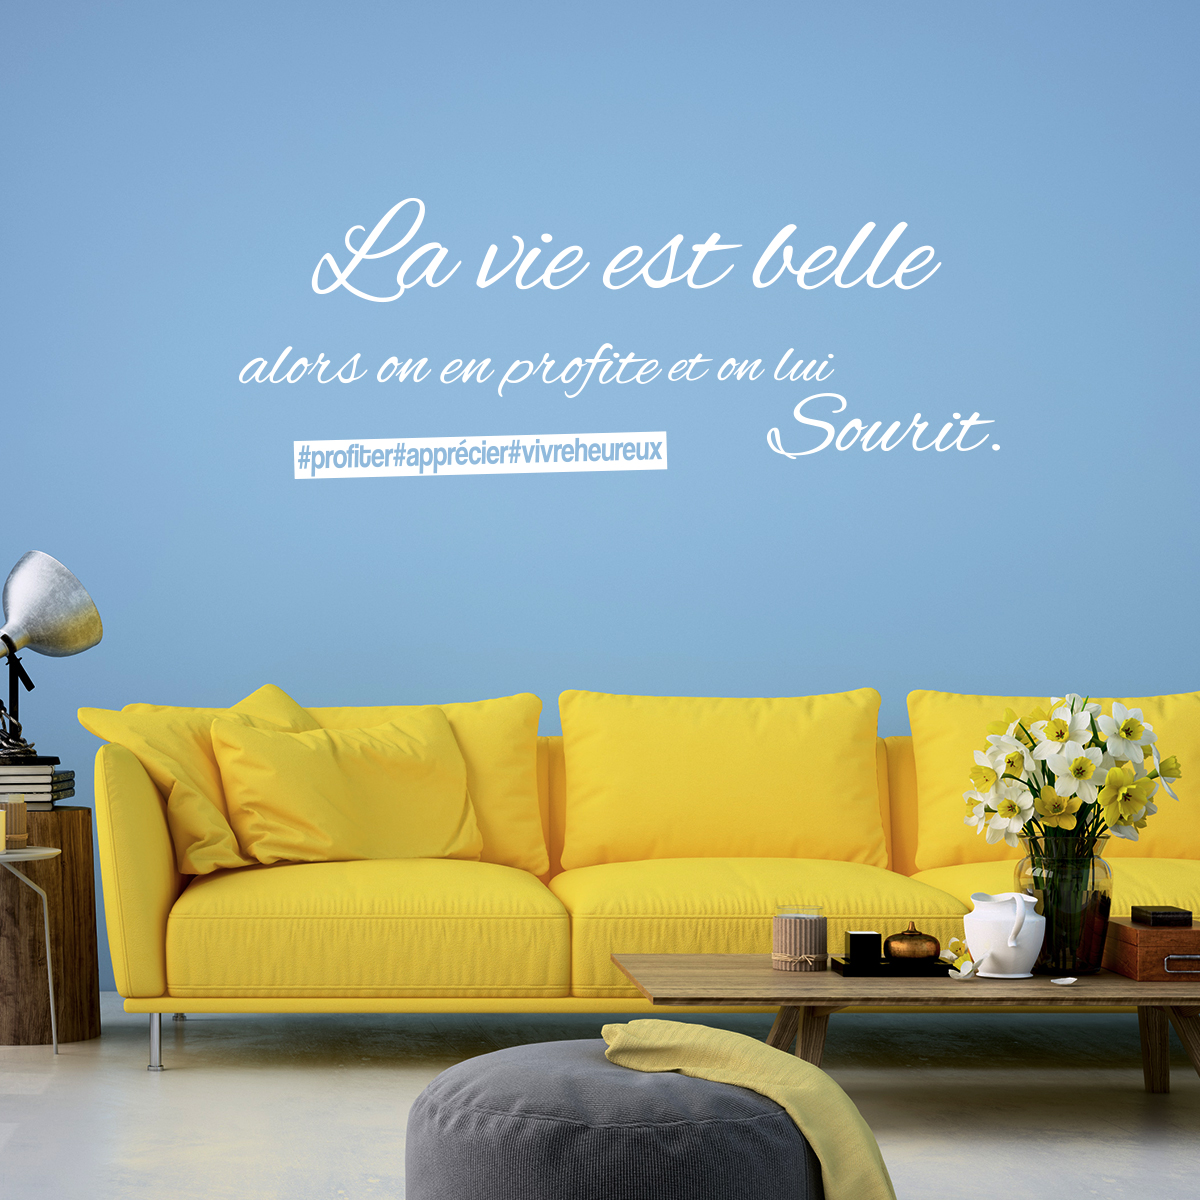 Quote Wall Decal La Vie Est Belle Alors On Lui Sourit Wall Decals Quote Wall Stickers French Ambiance Sticker